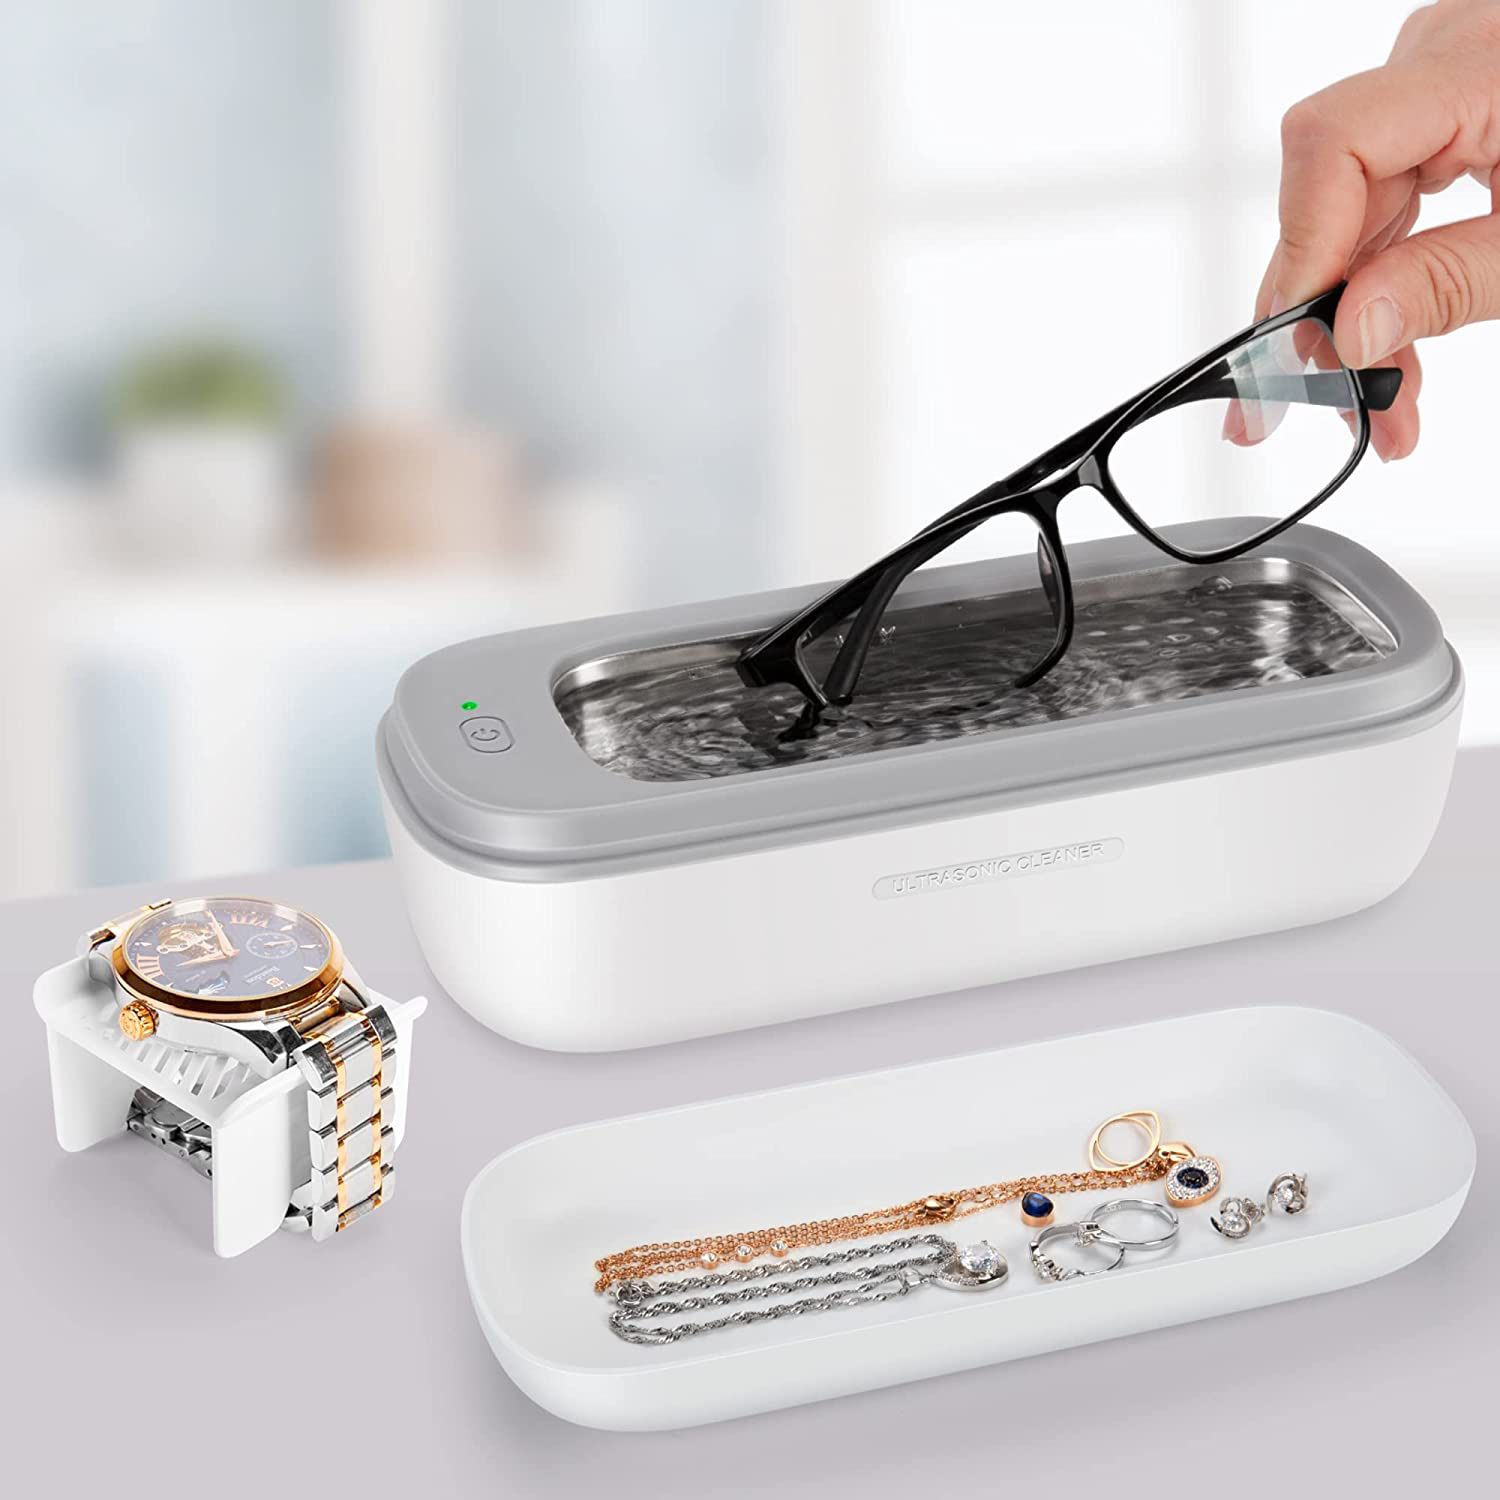 Jewelry Ultrasonic Cleaner for Gold Silver Ring Earring All Jewelry, Small Sonic Cleanser Machine for Eyeglass Watch Coin Retainer at-Home or Travel U